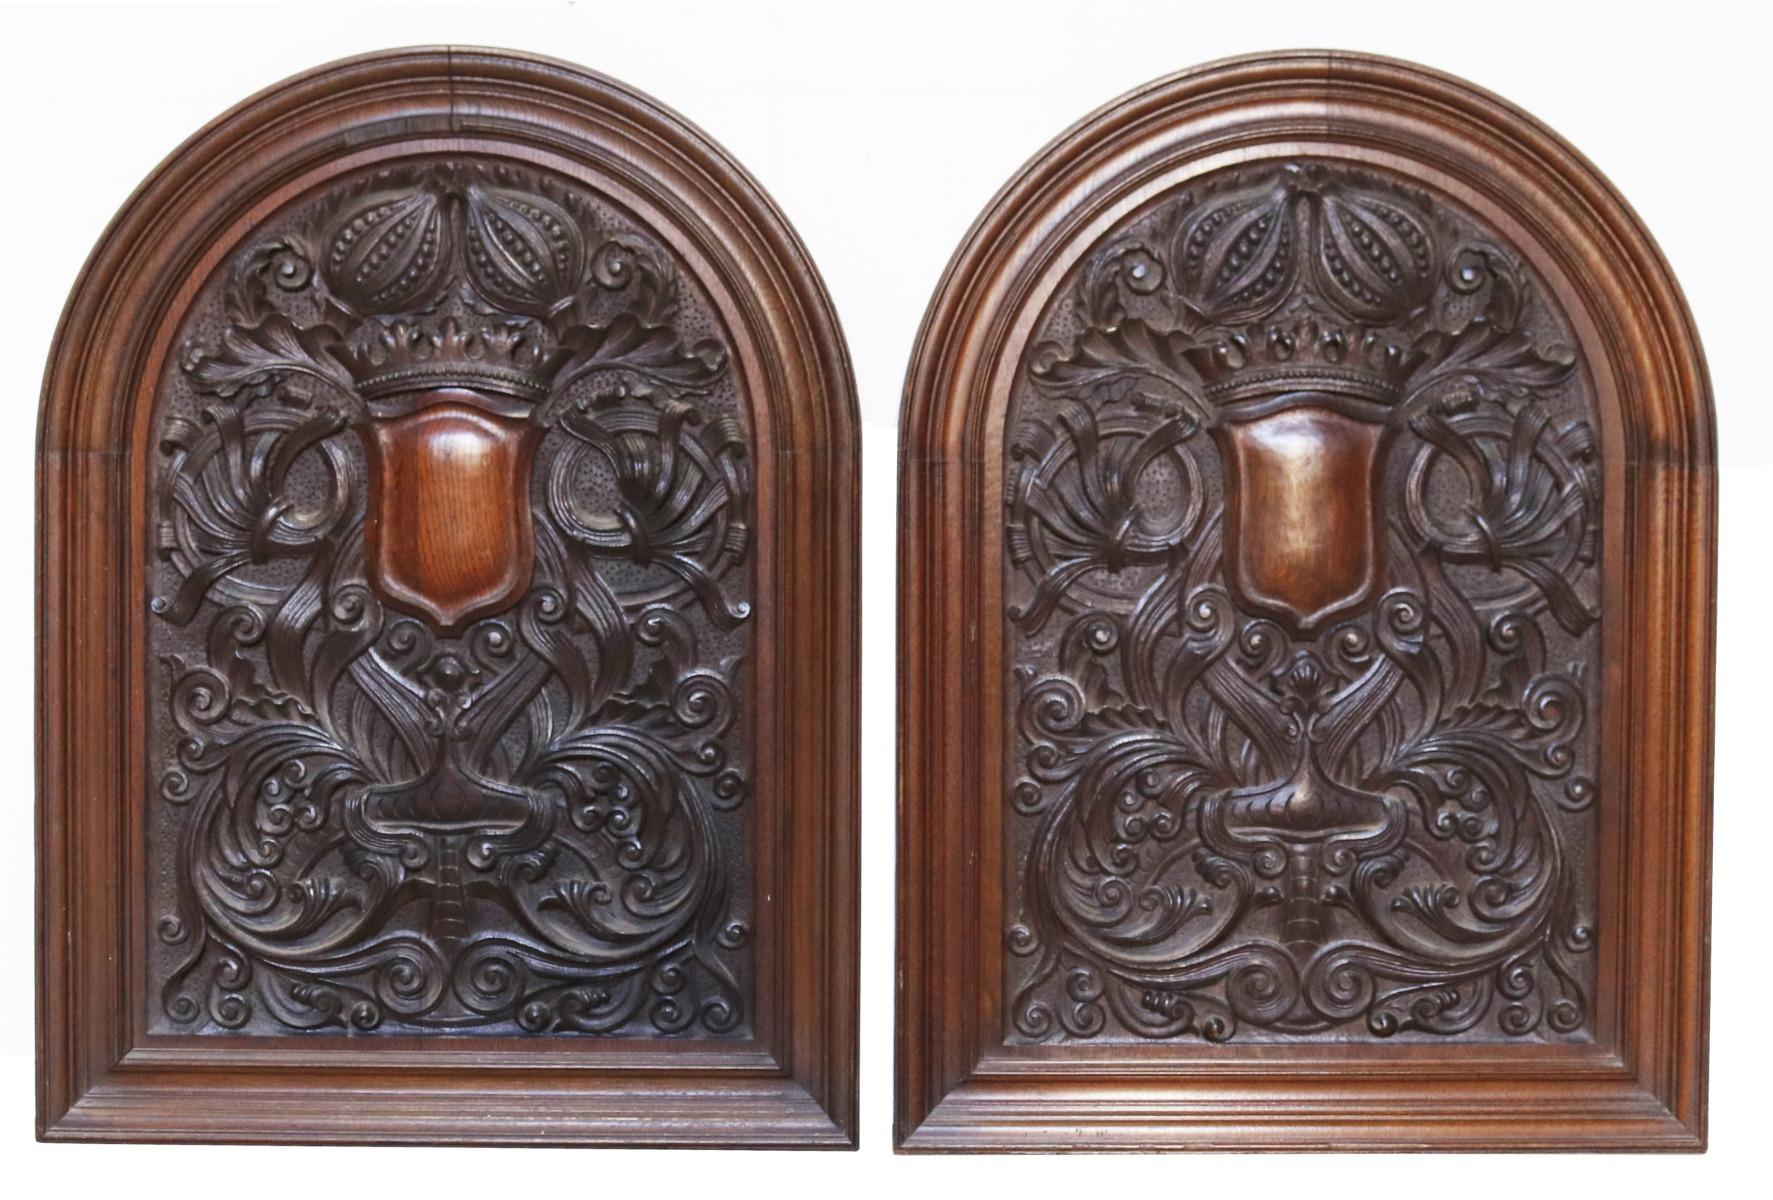 A pair of finely carved oak wall panels, each containing a shield centre, surround by scrolling foliage and fruits.

Additional Dimensions (each)

78.5 x 58 x 4.5 cm.